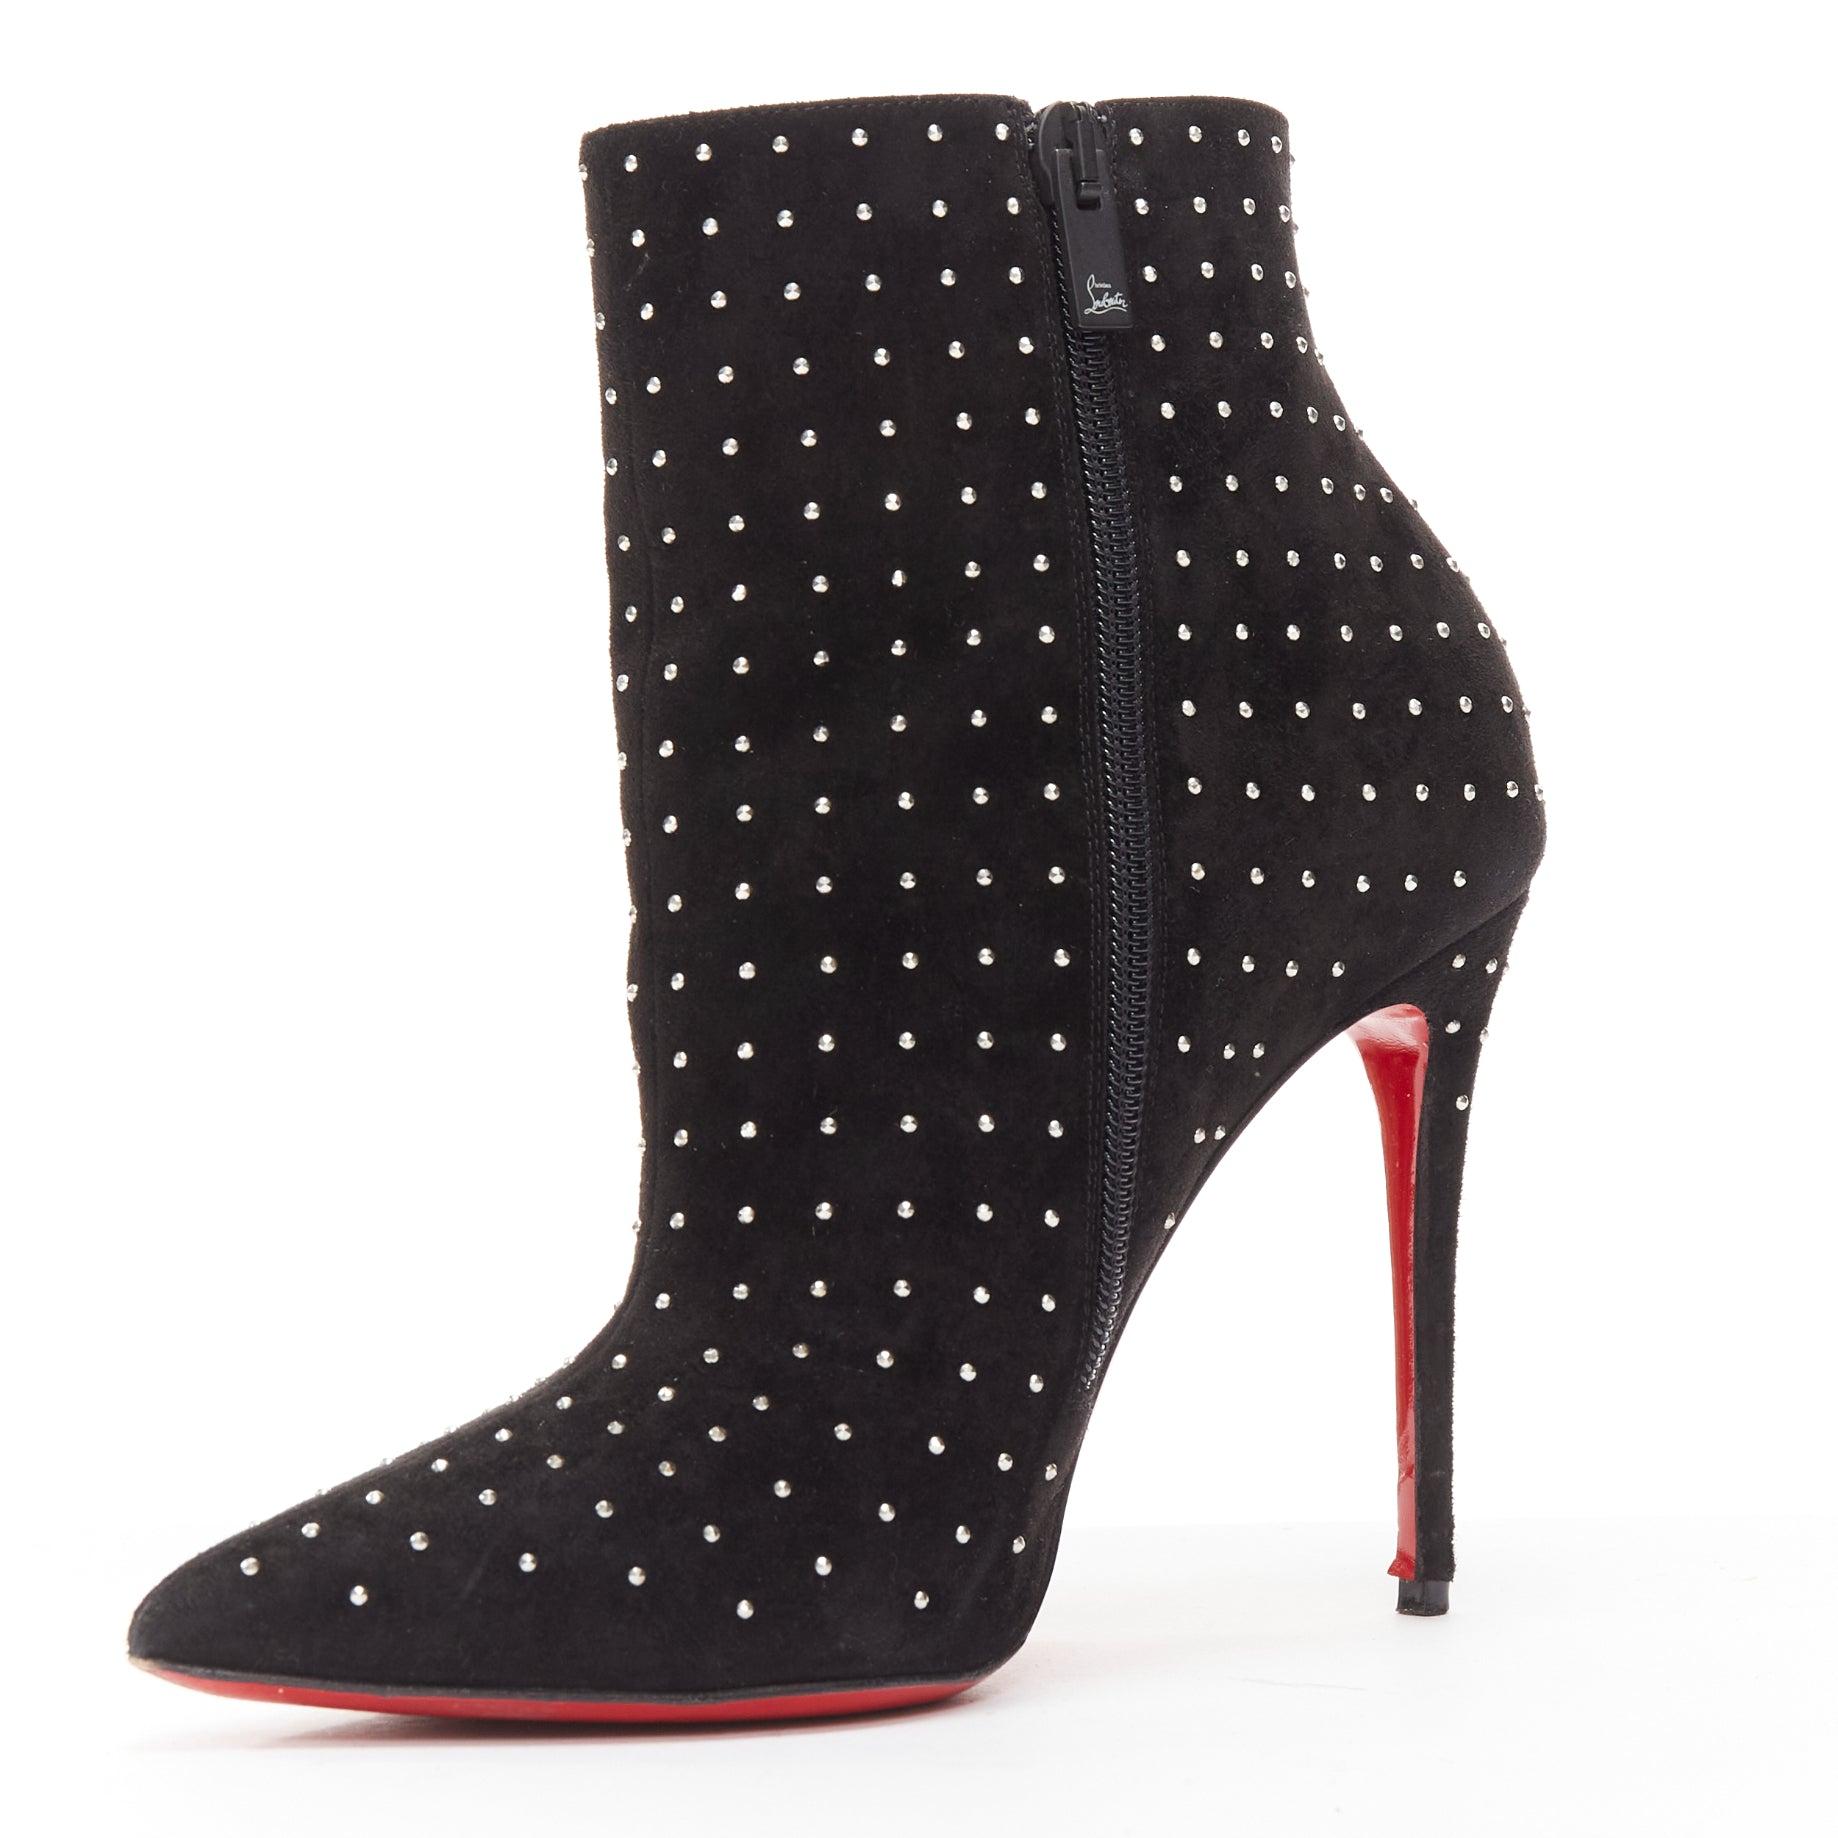 Women's CHRISTIAN LOUBOUTIN So Kate Booty black suede micro stud embellished pointy EU36 For Sale